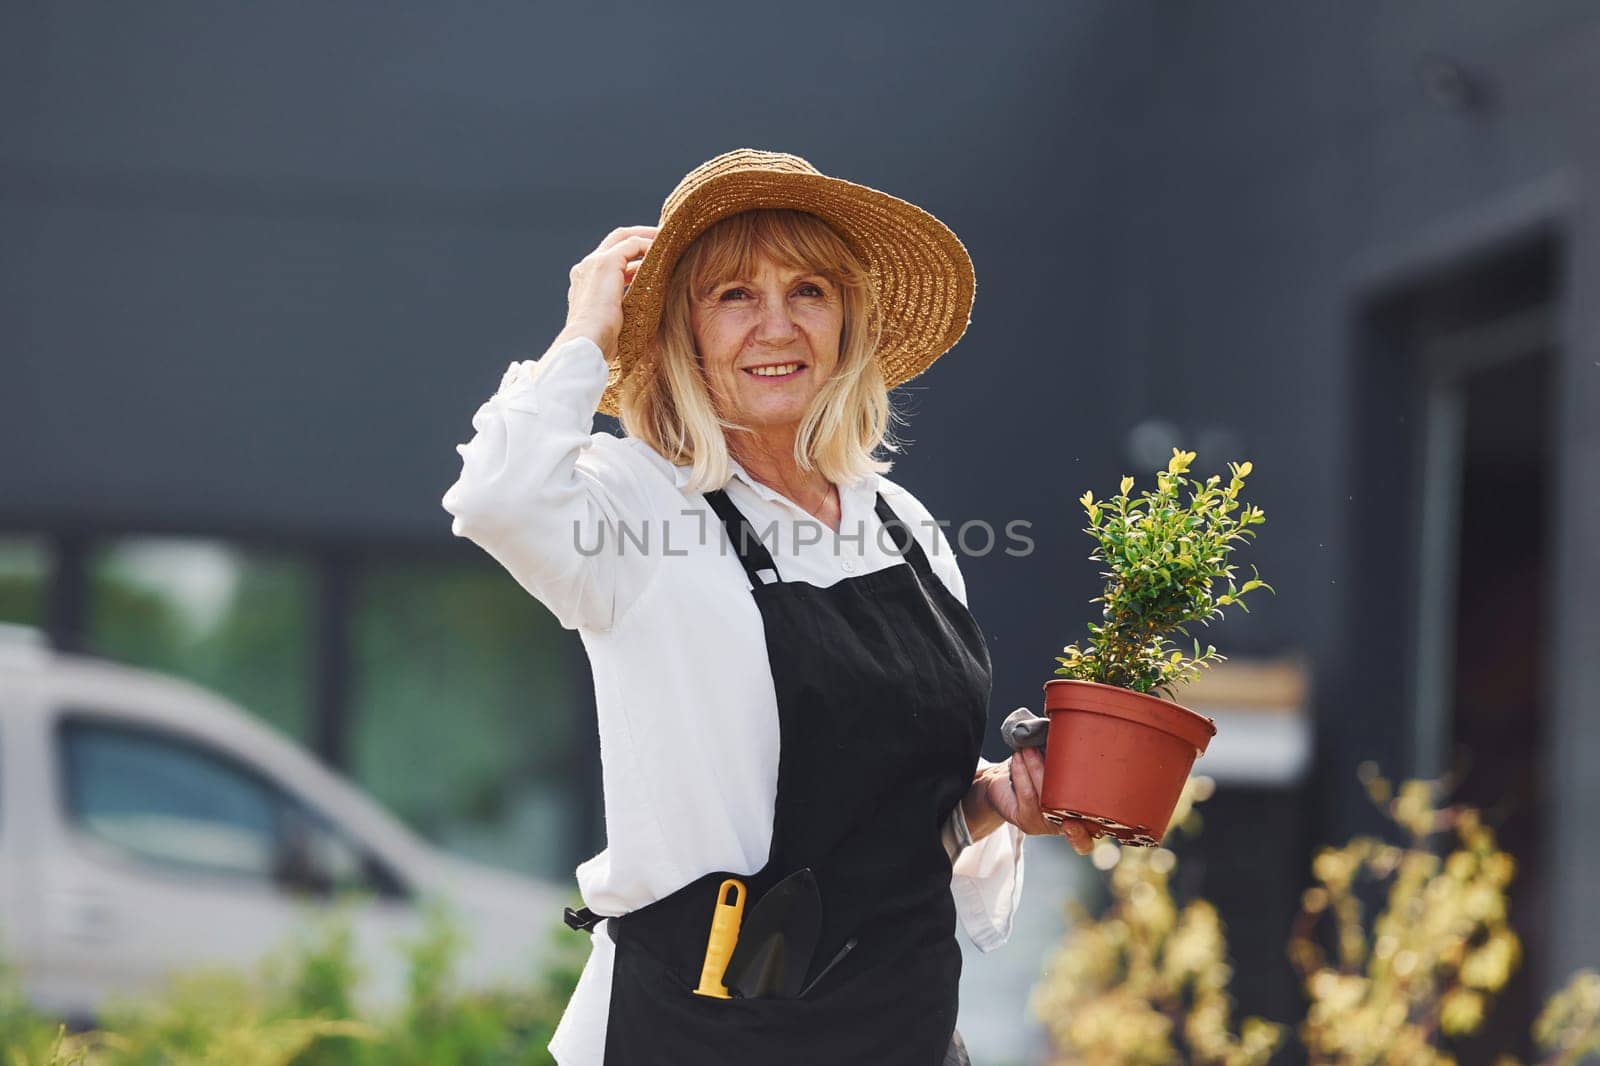 Holding pot in hands. Senior woman is in the mini garden at daytime. Building exterior behind.